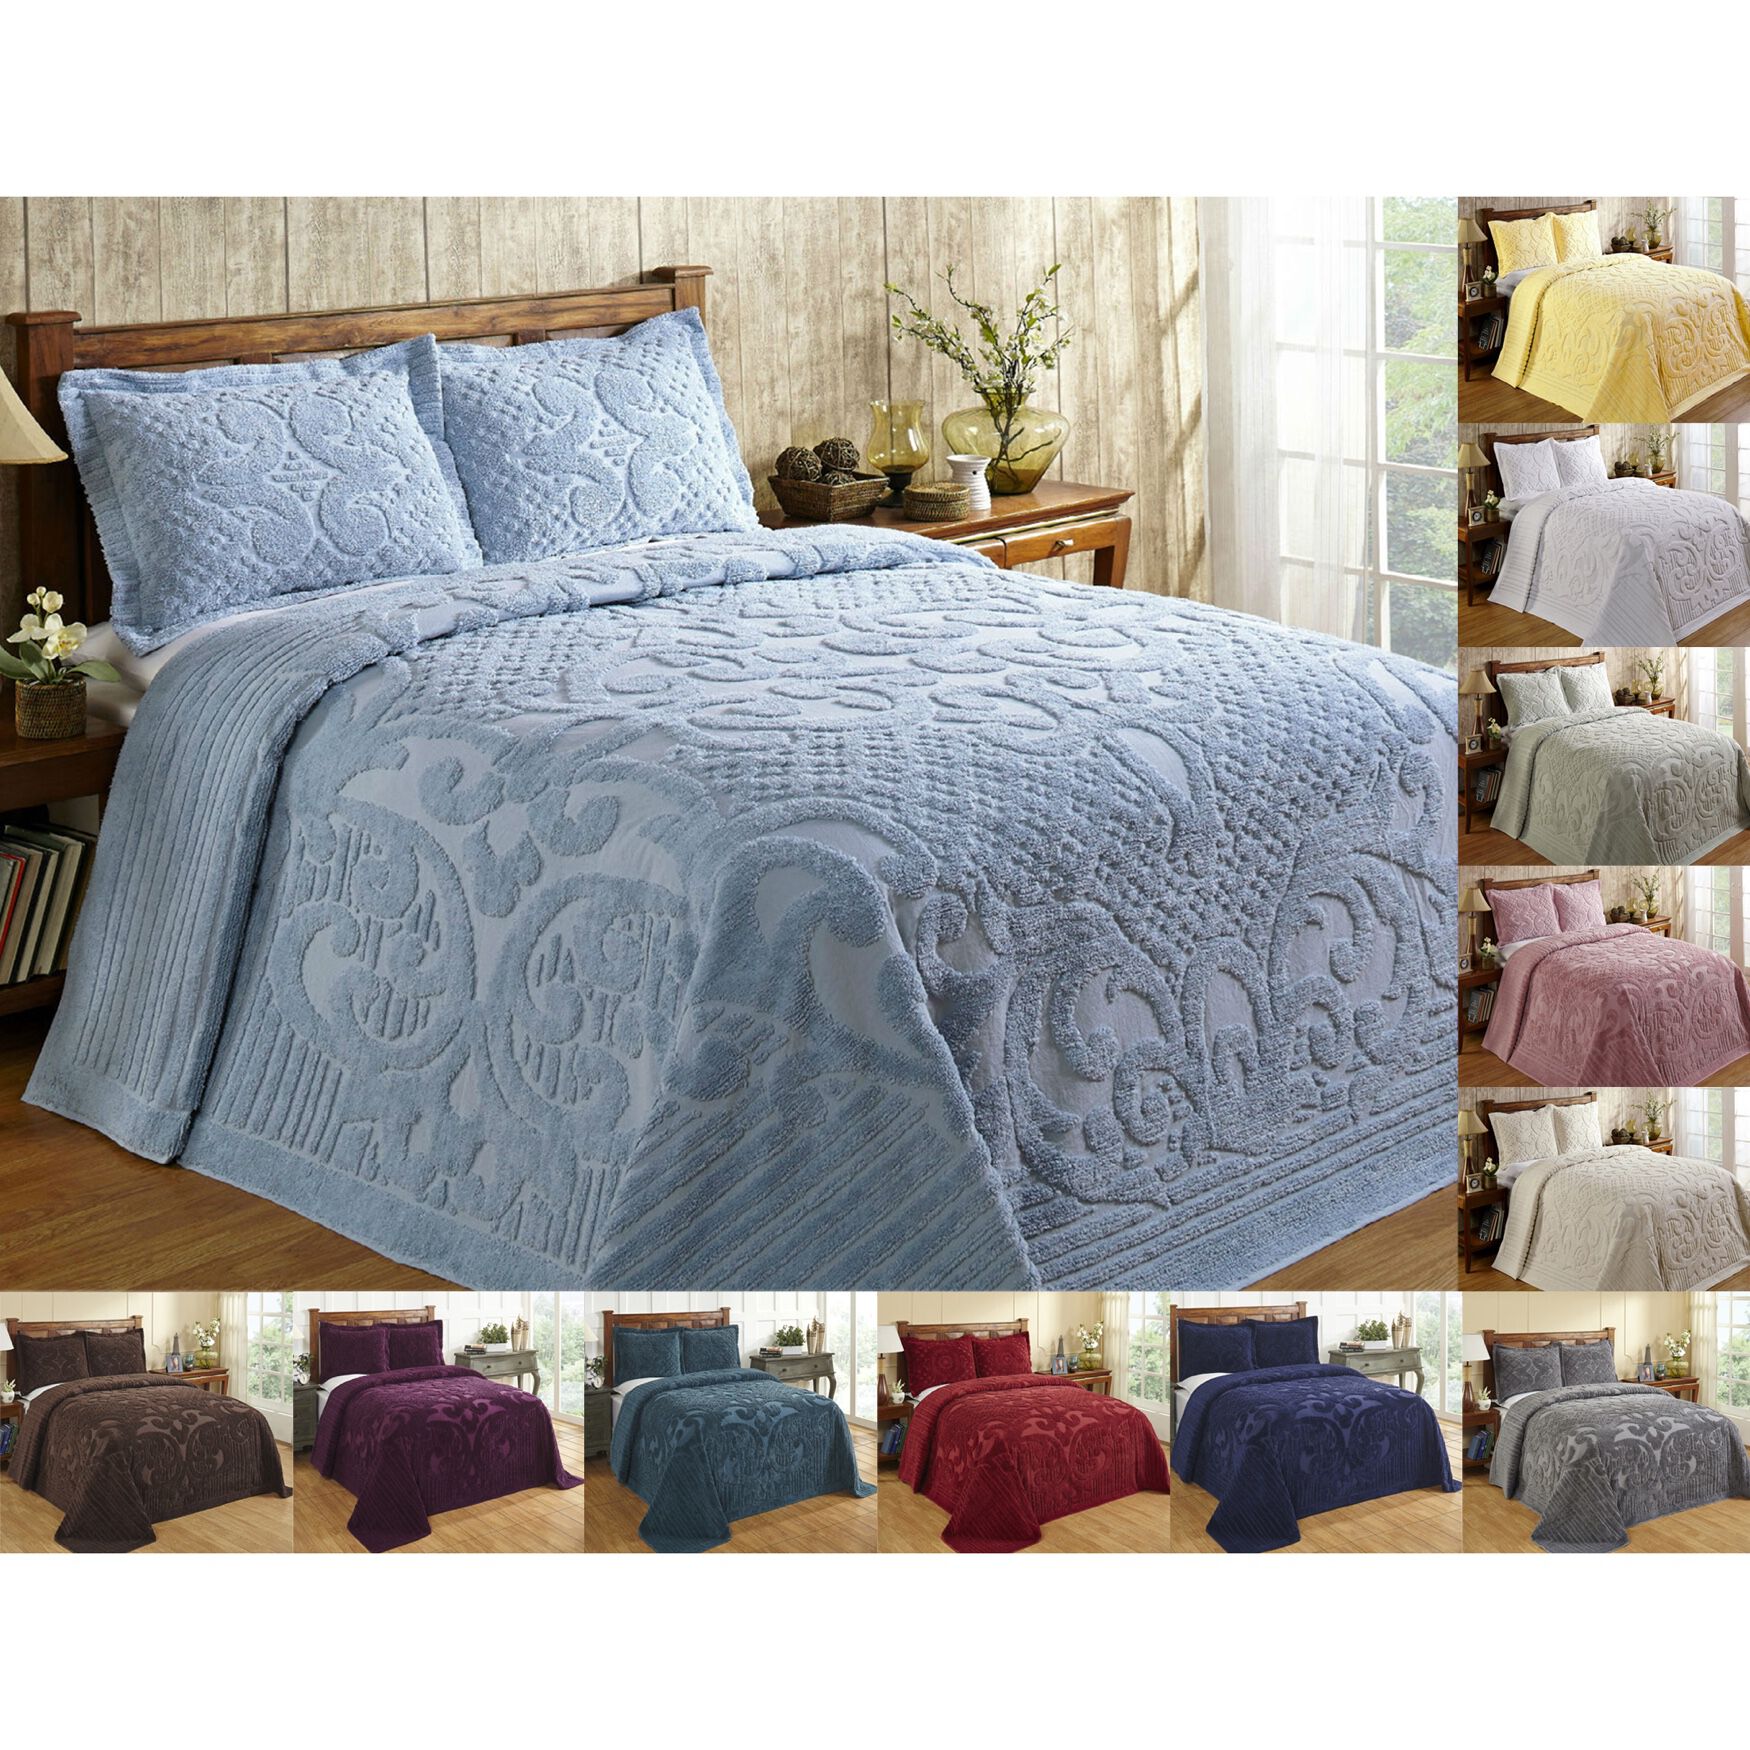 ALL COTTON ASHTON HEAVYWEIGHT CHENILLE BEDSPREAD AND PILLOW SHAM COMPLETE SET 